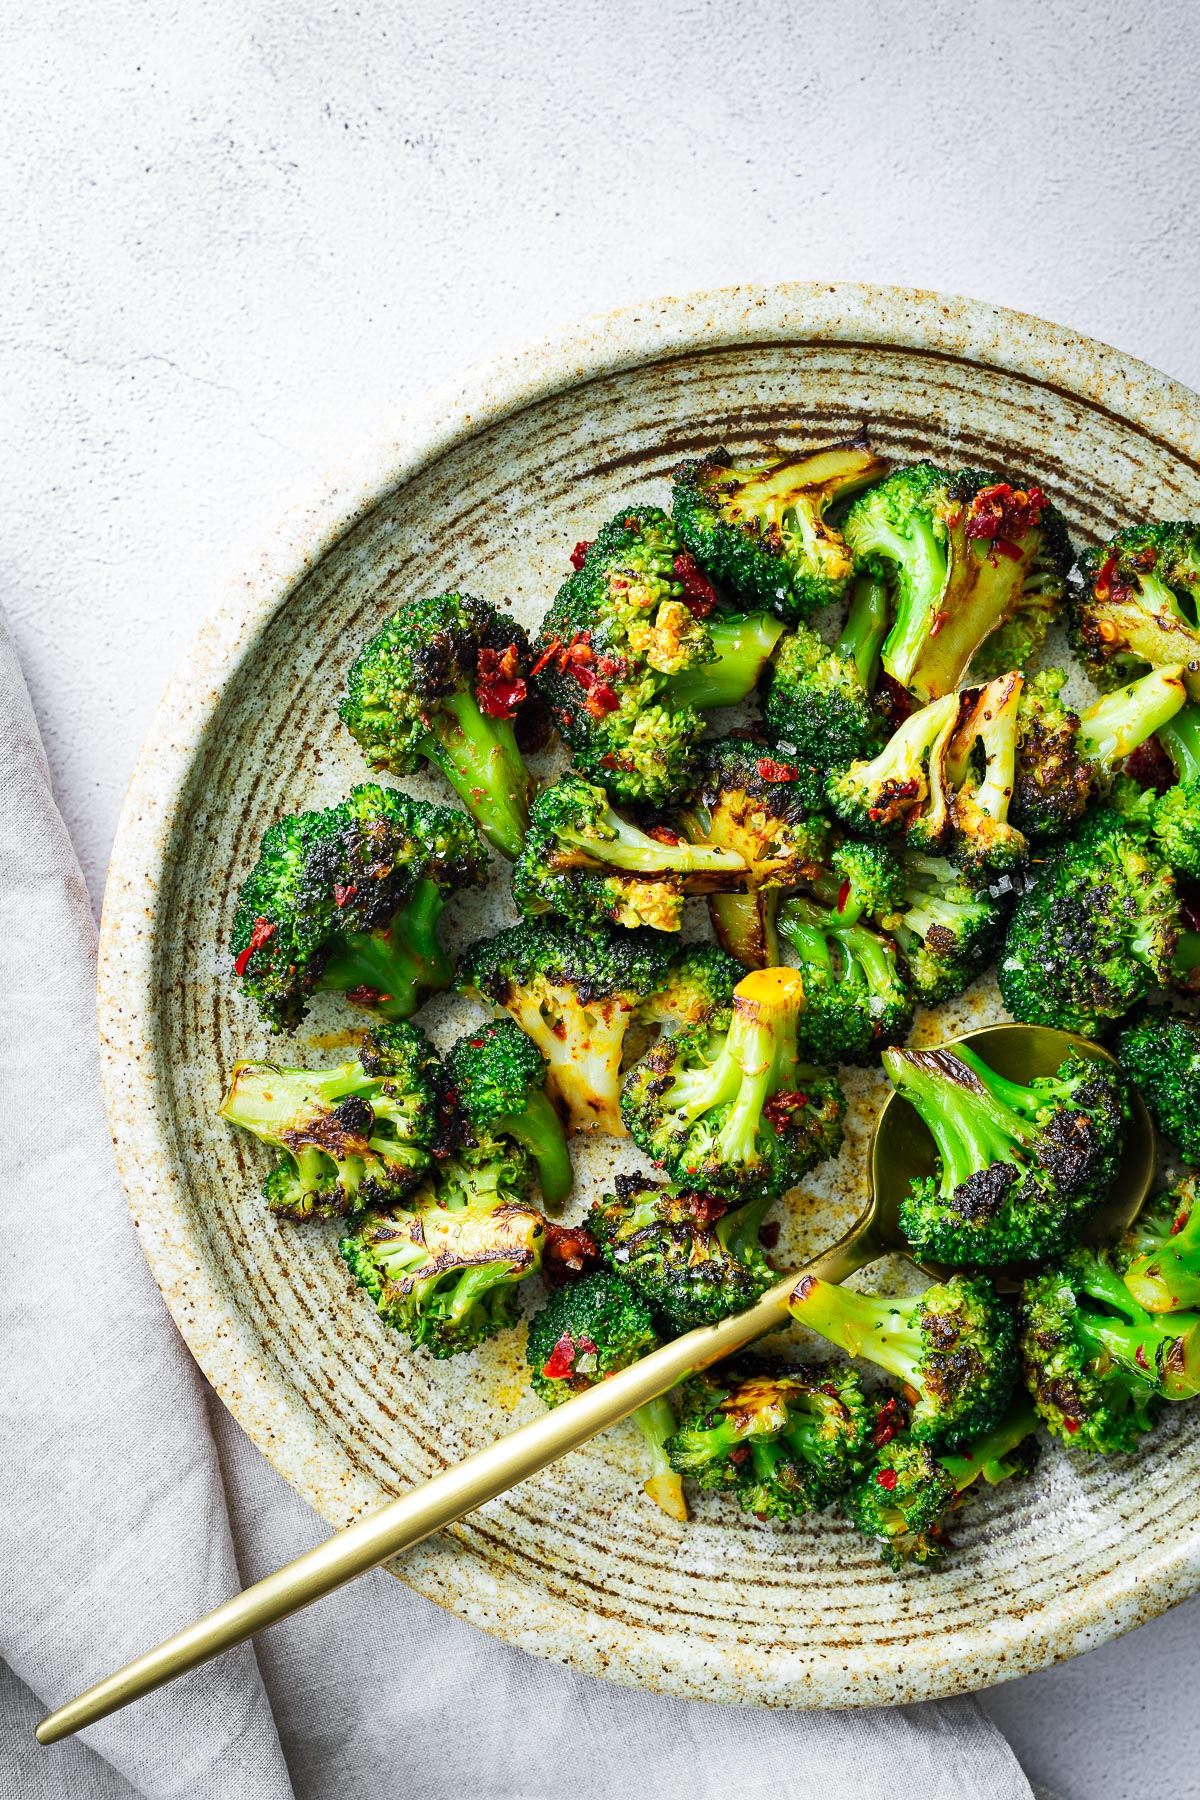 Sautéed frozen broccoli with harissa in a ceramic bowl with a gold serving spoon.